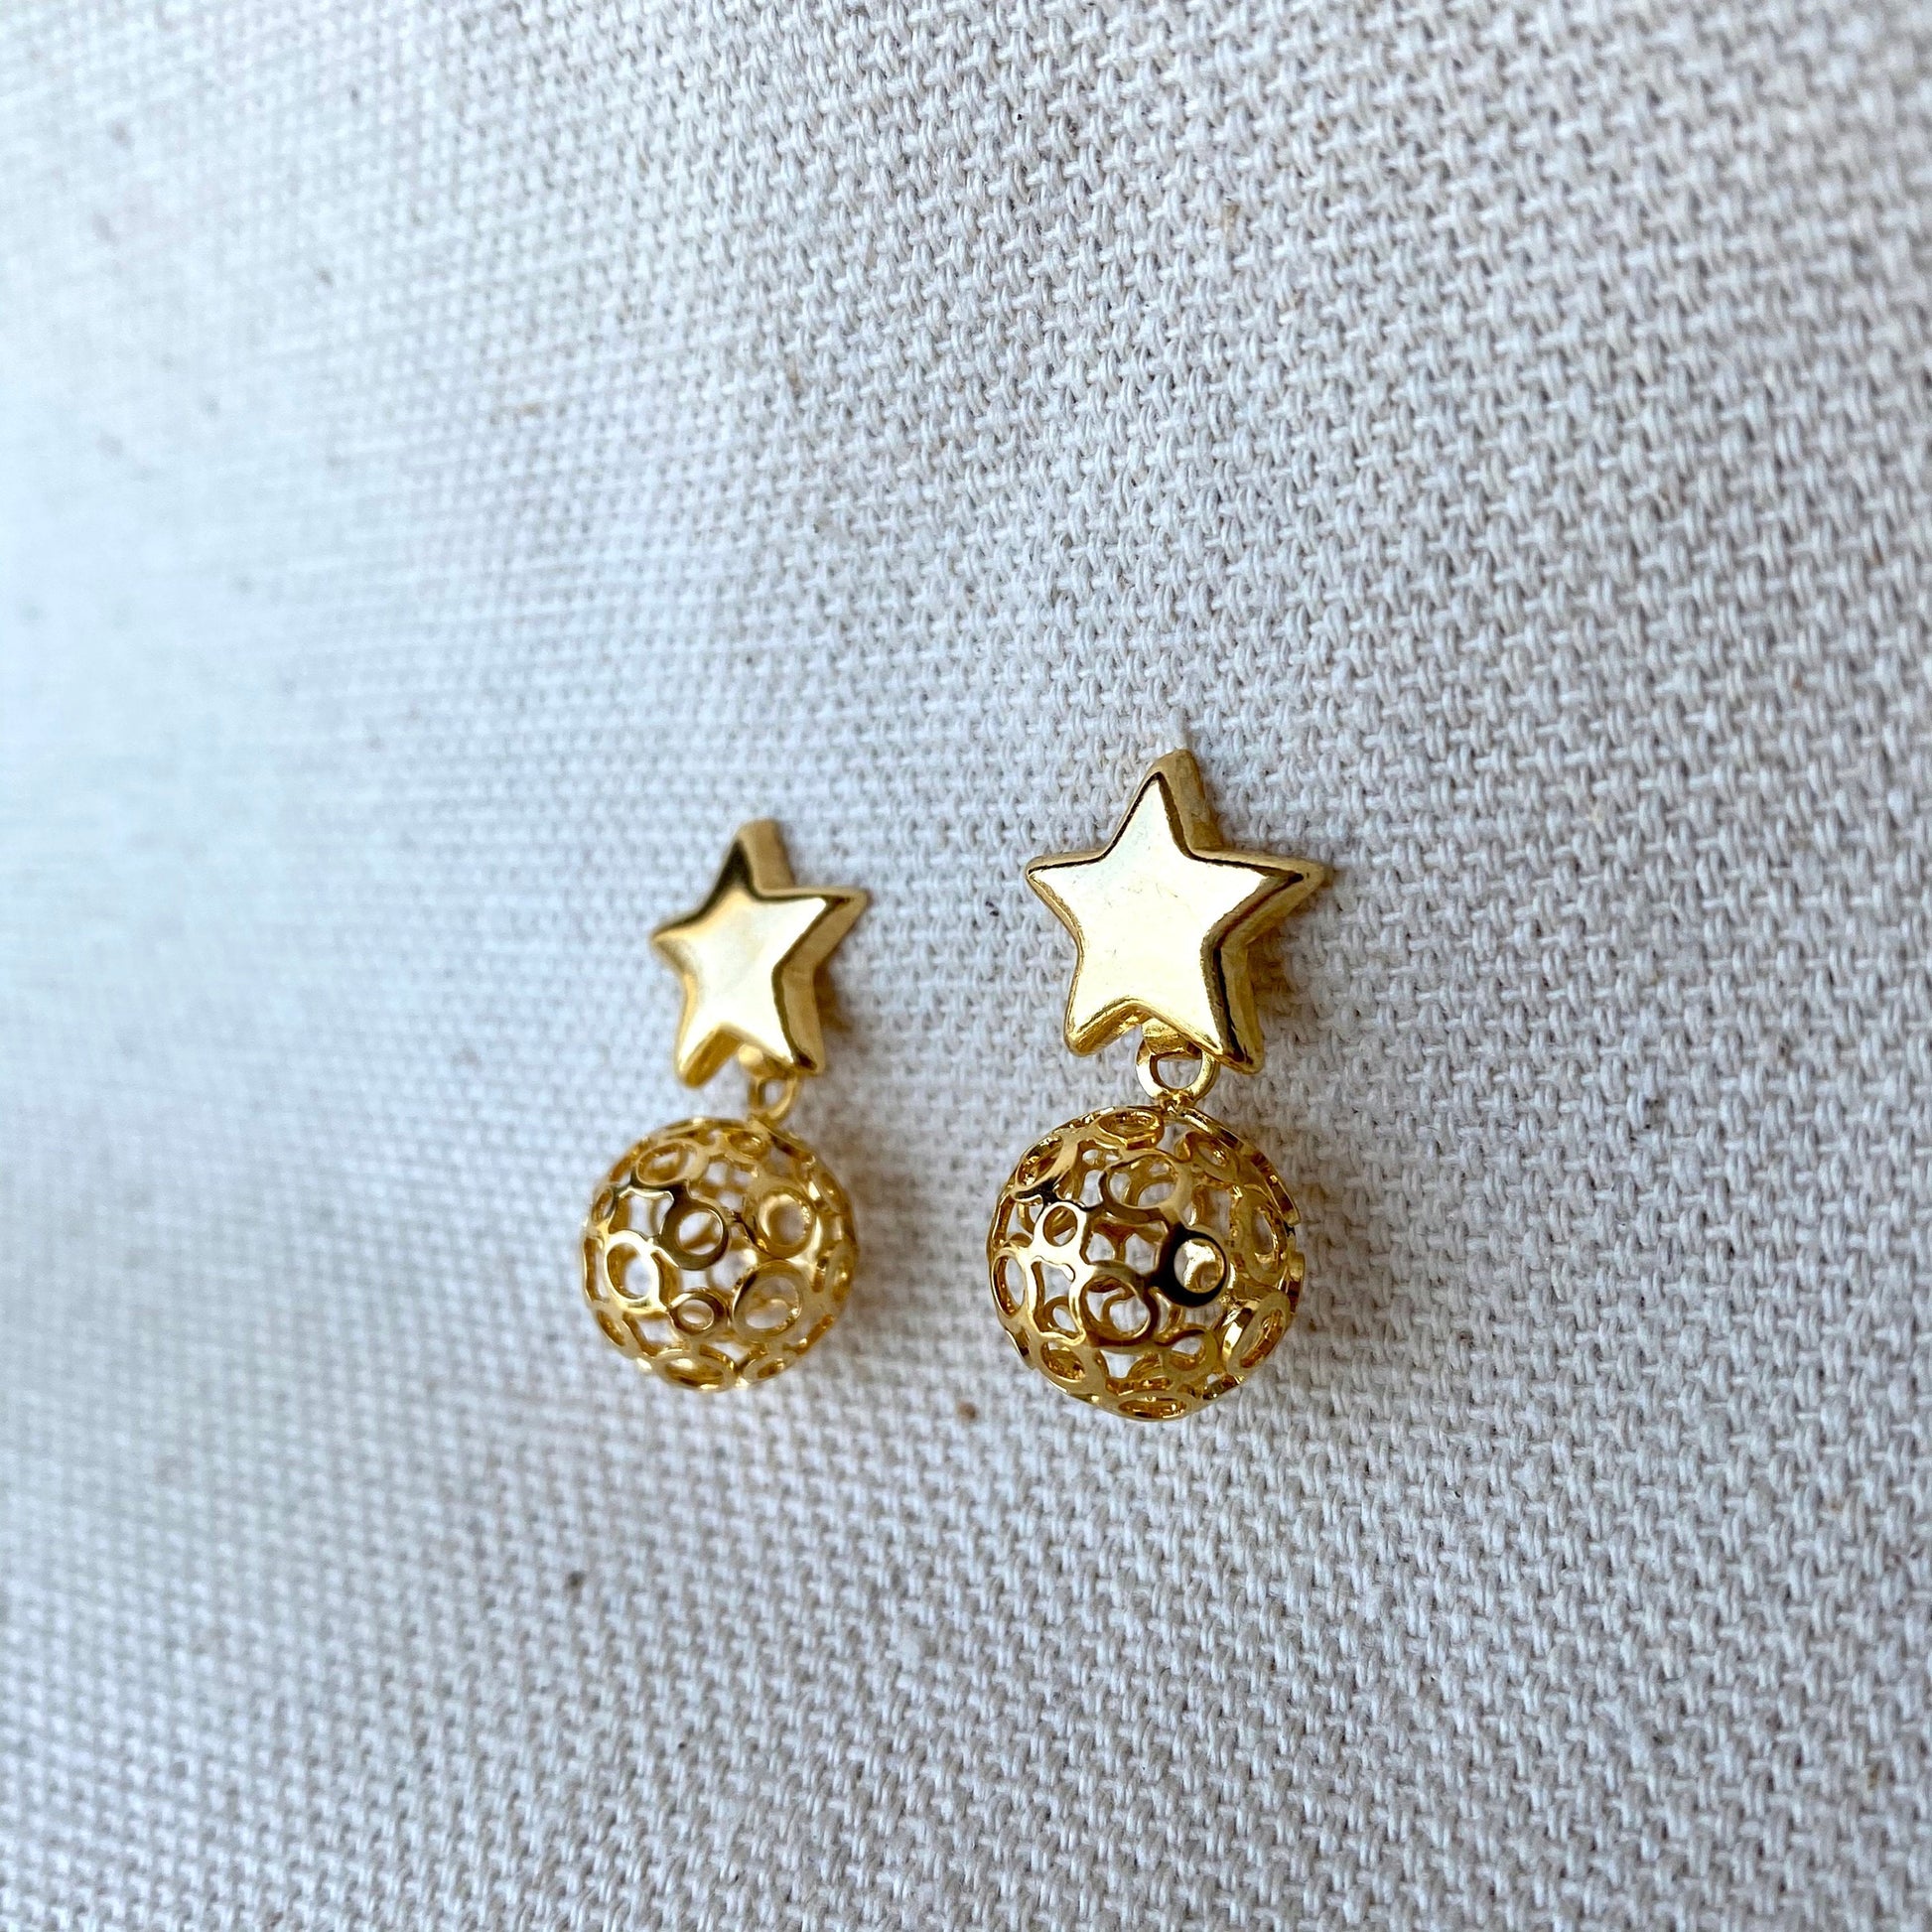 18k Gold Filled Star Hallowed Ball Earrings Wholesale Jewelry Supplies